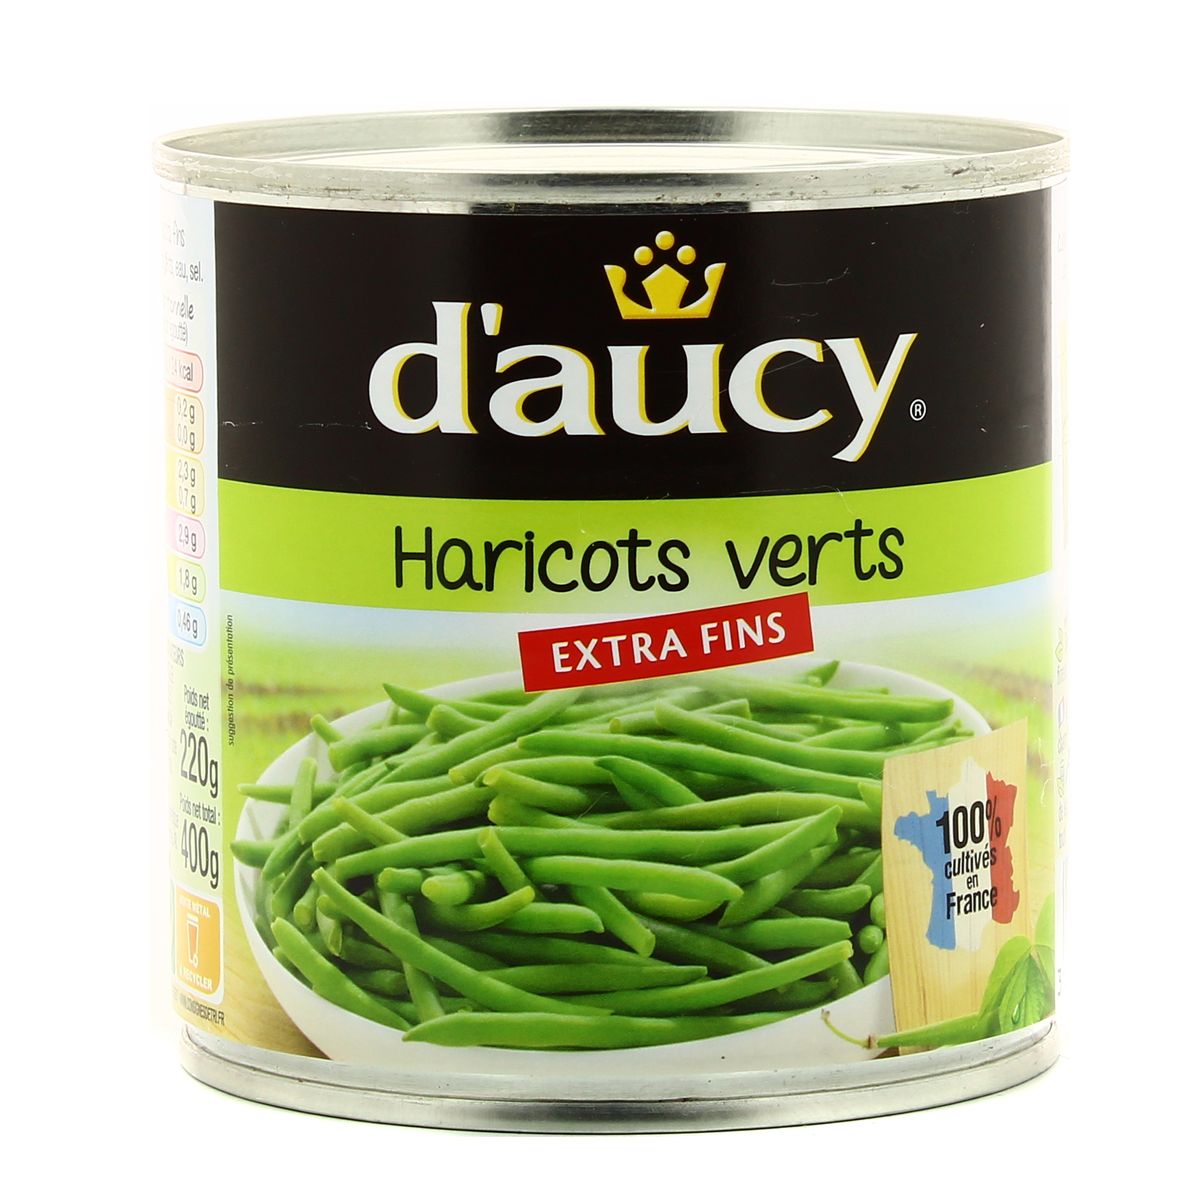 DAUCY Haricots Verts Extra Fins 1/2 Pne 220g -I21